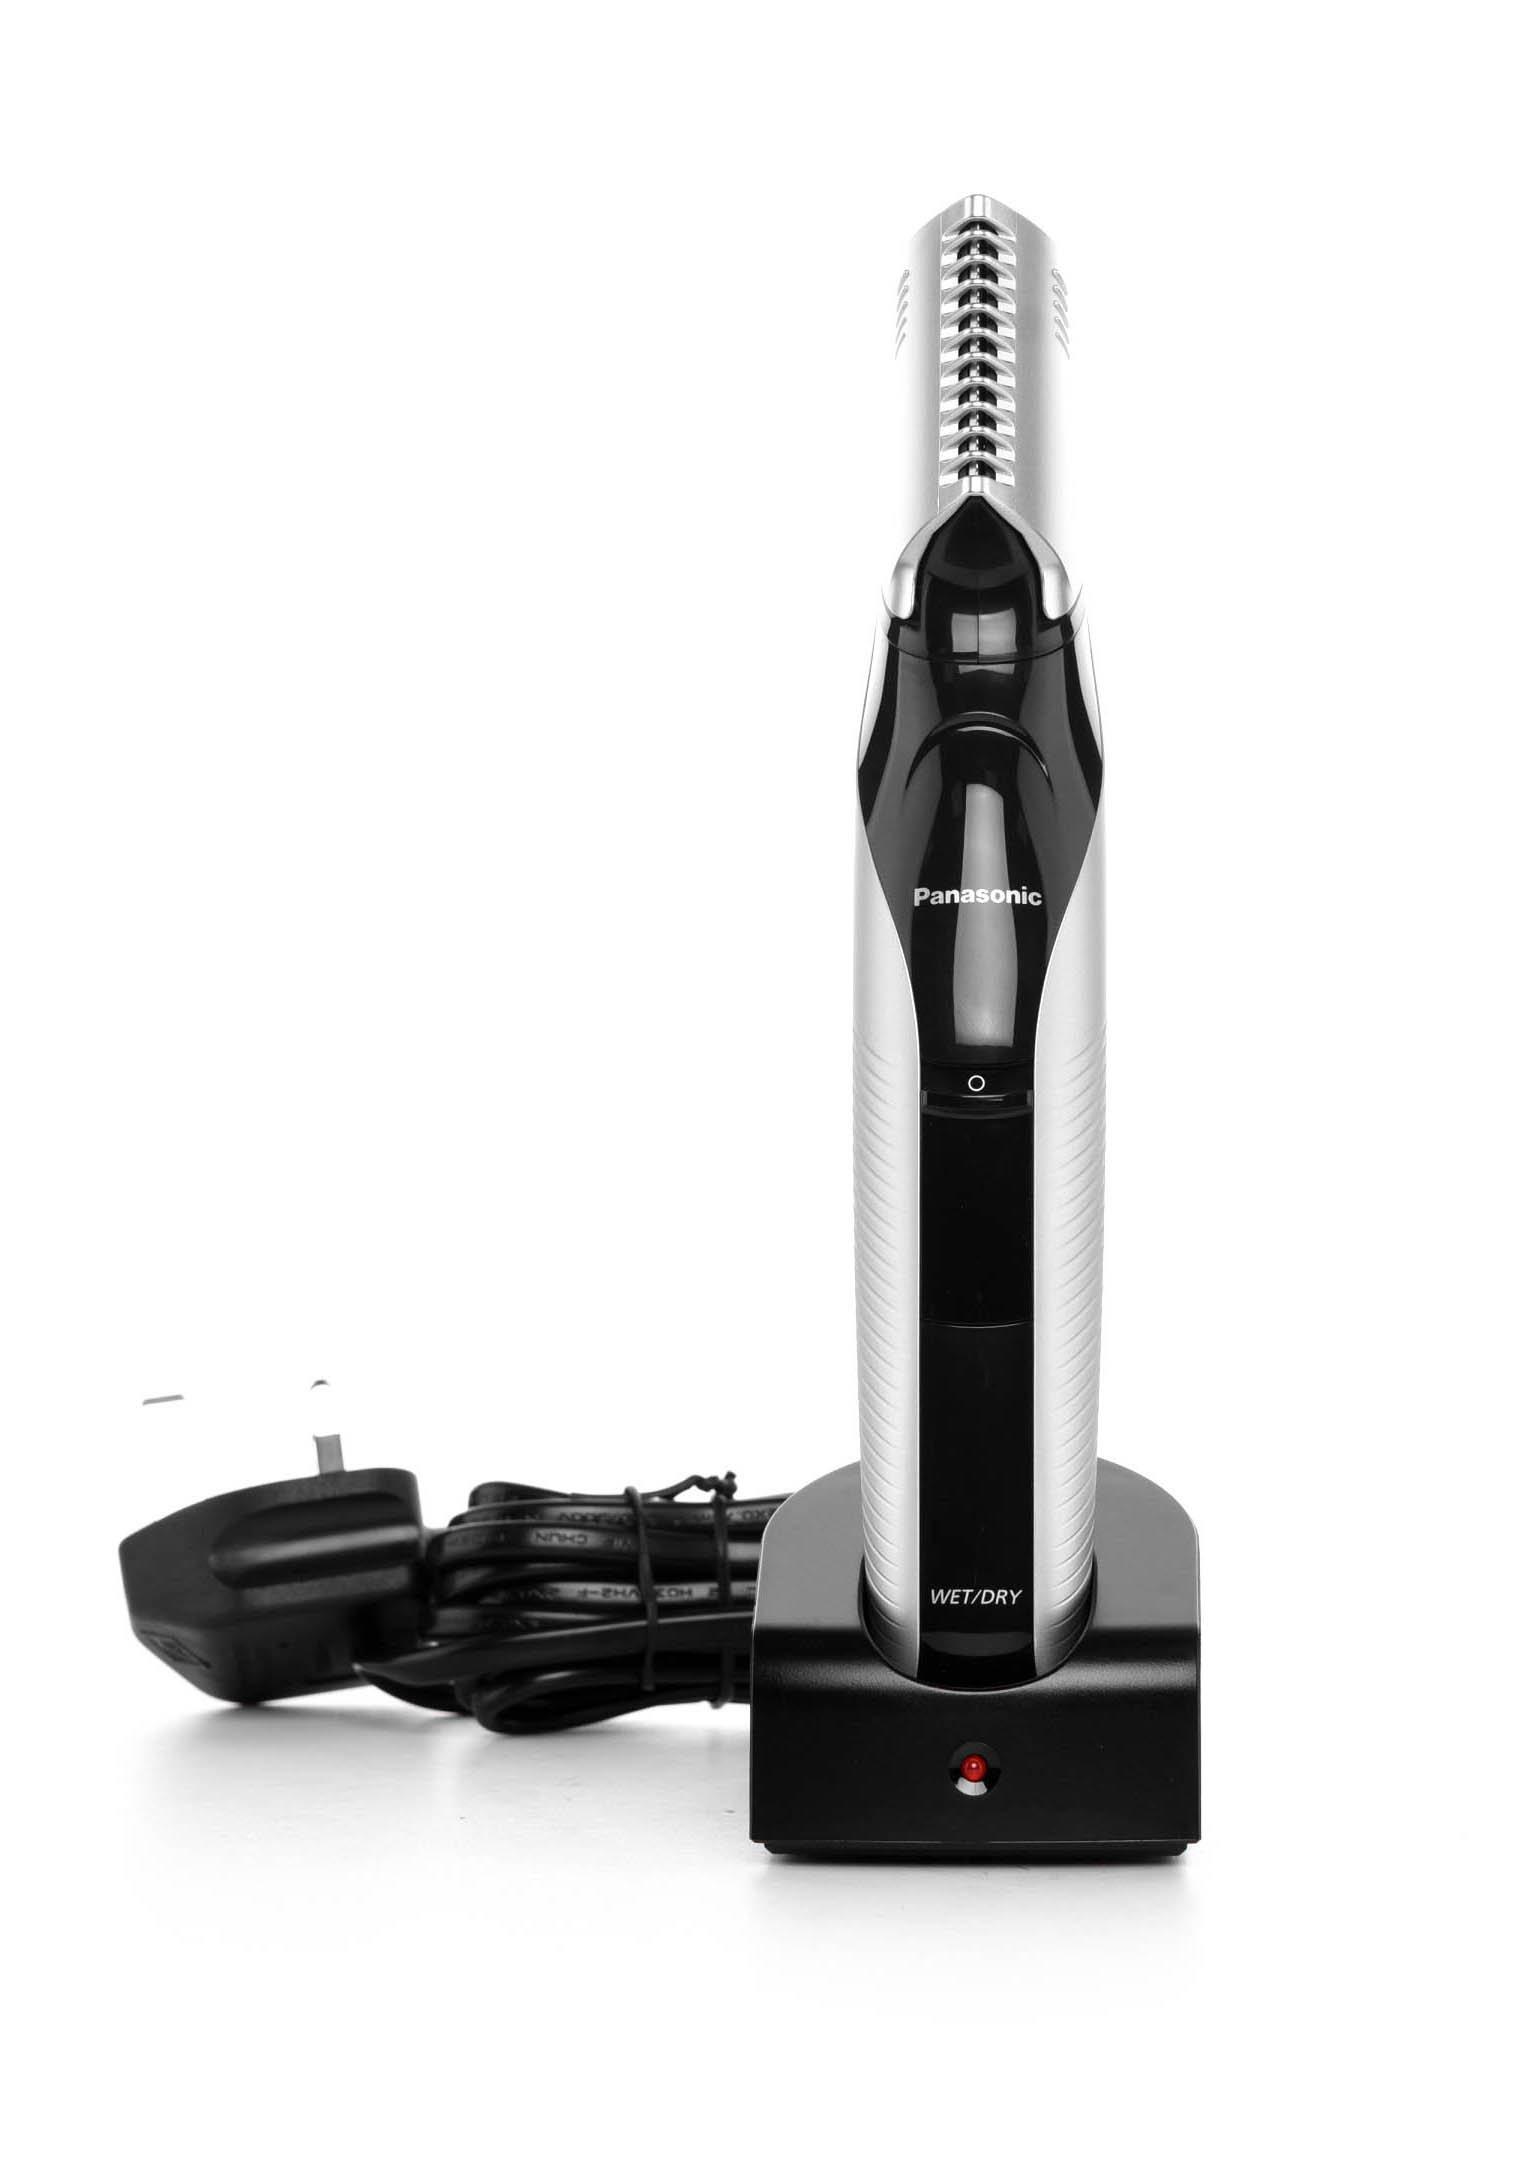 new trimmer price